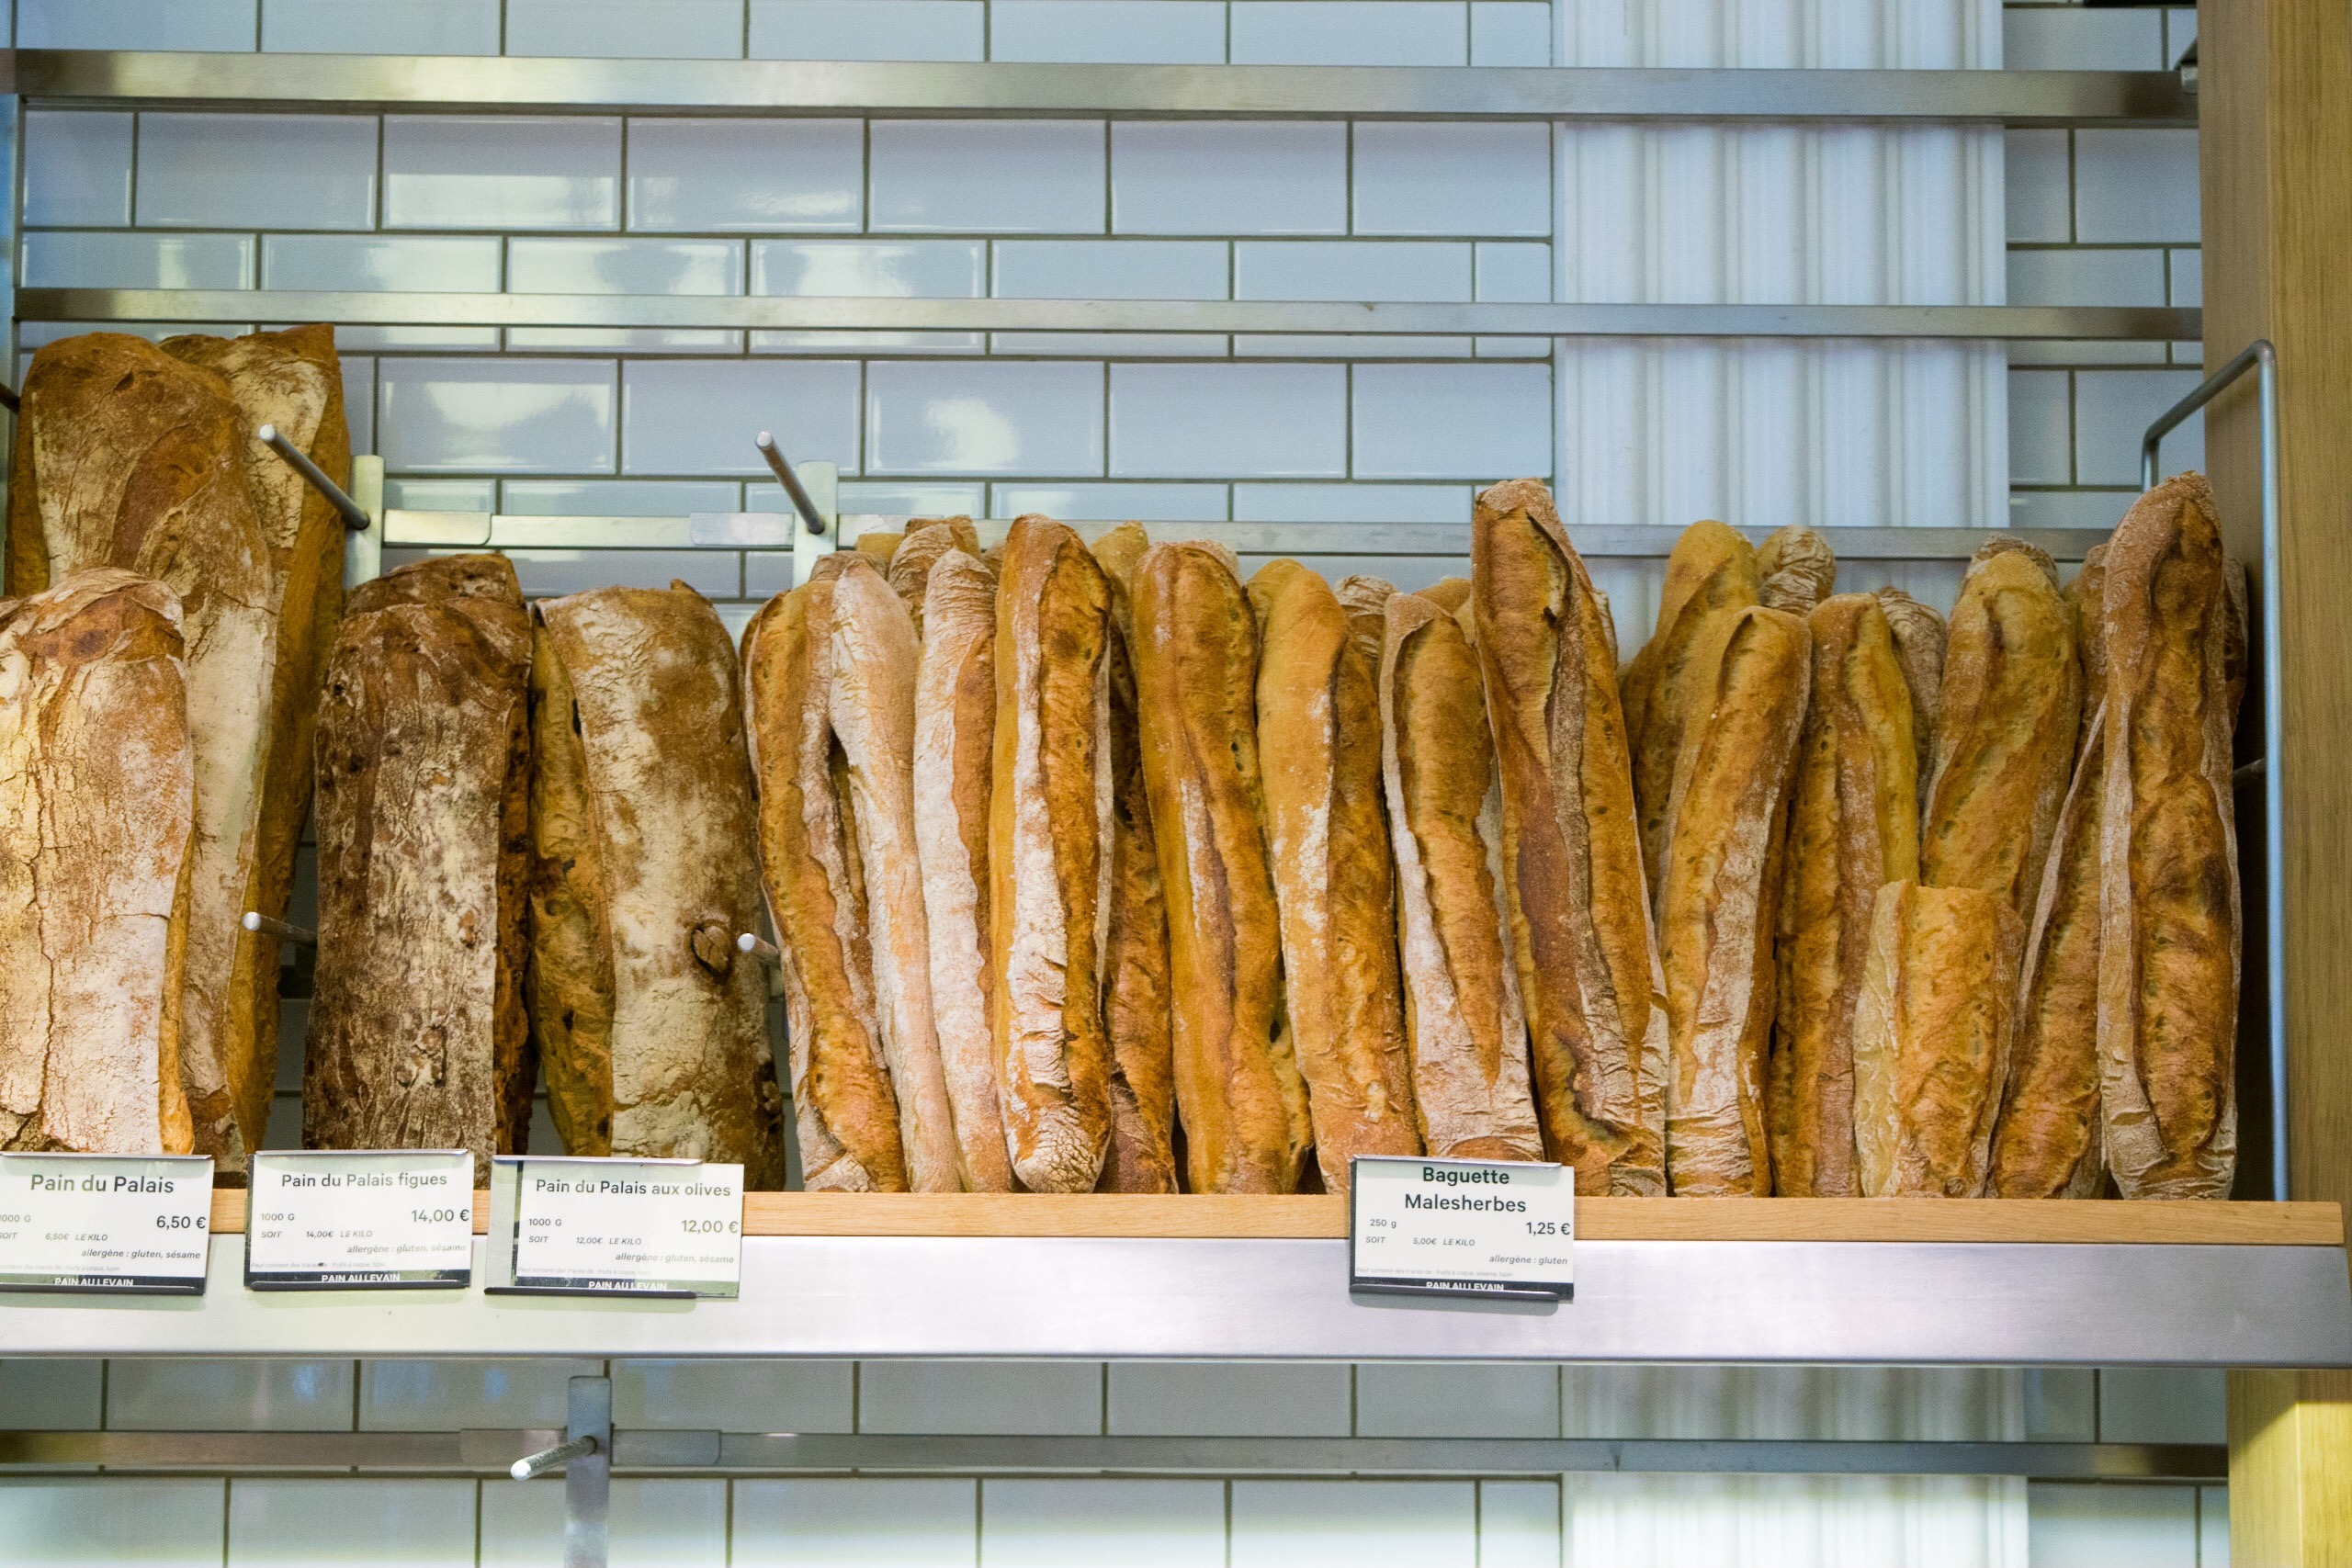  Baguette and Savory Dishes